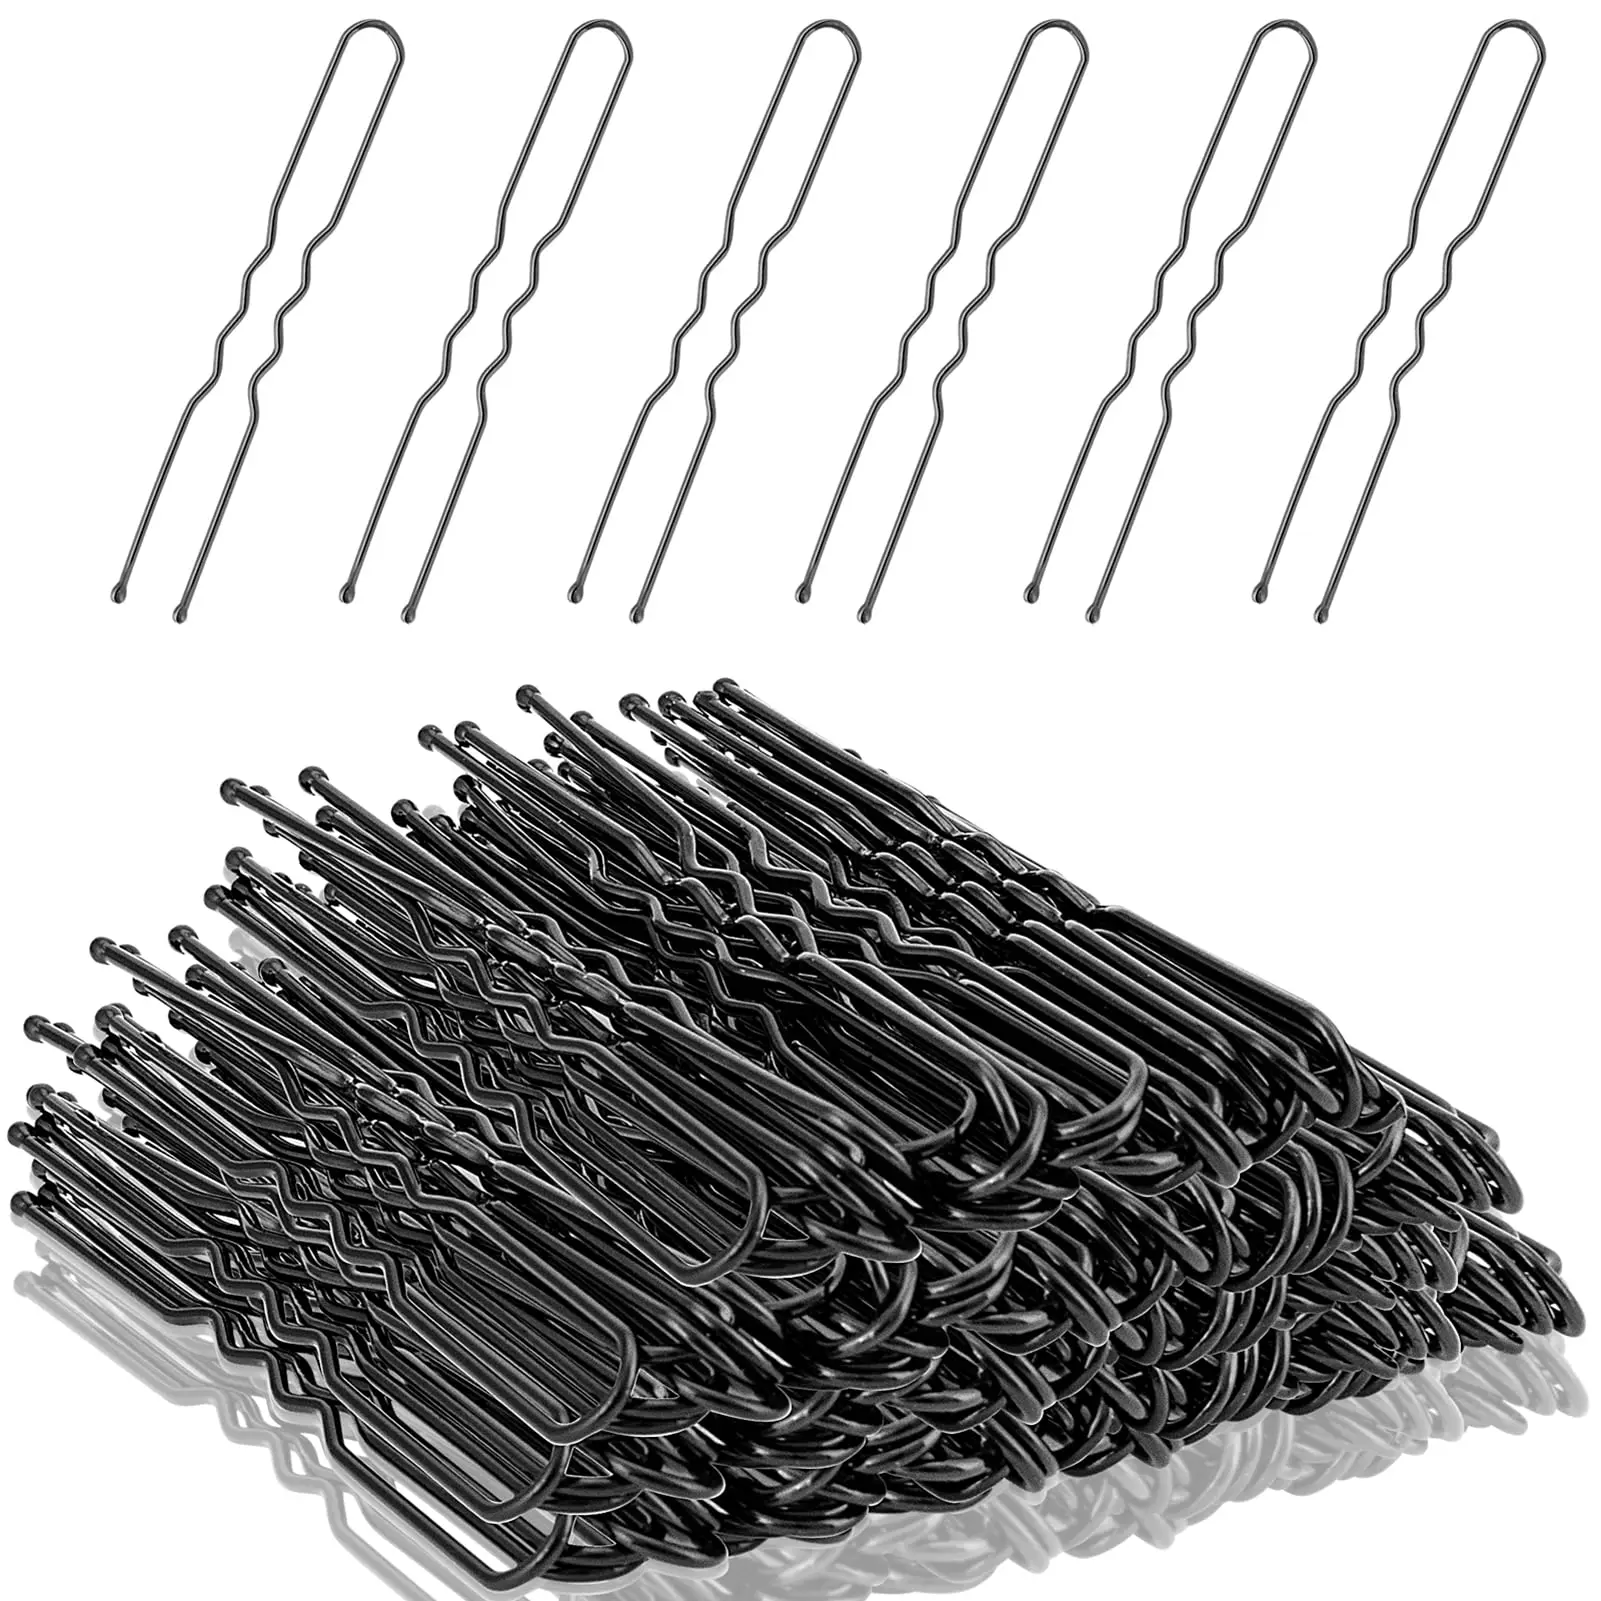 

U Shaped Hair Pins 50pcs 2.4" Hairpins for Buns Bobby Pins for Adults Kids Hairdressing Salon Hair Styling Accessories Black 6cm